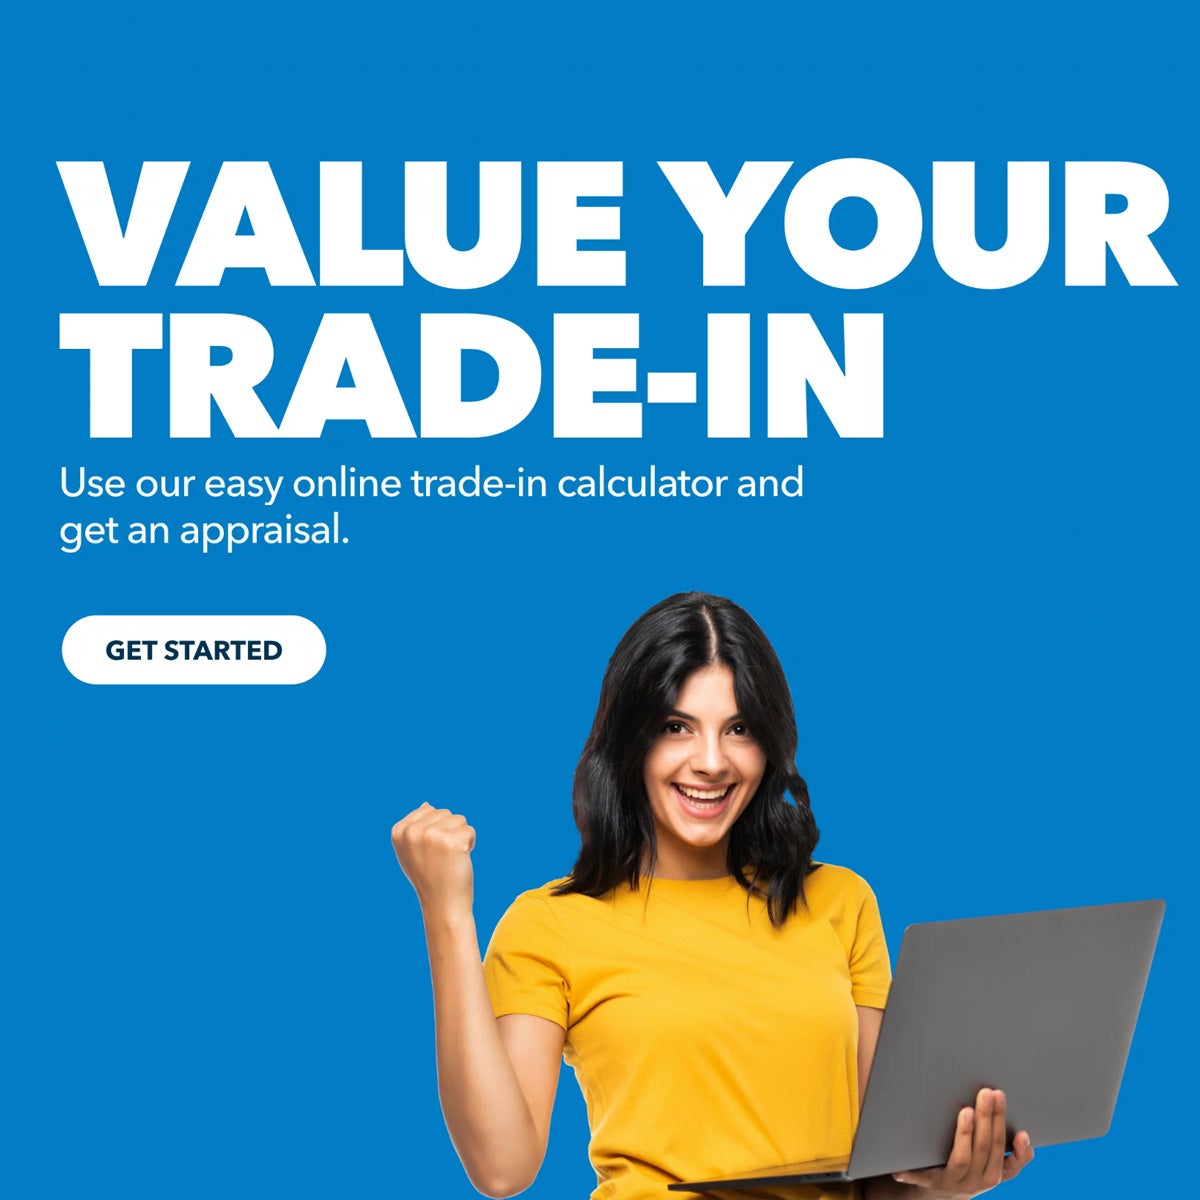 Value Your Trade-in